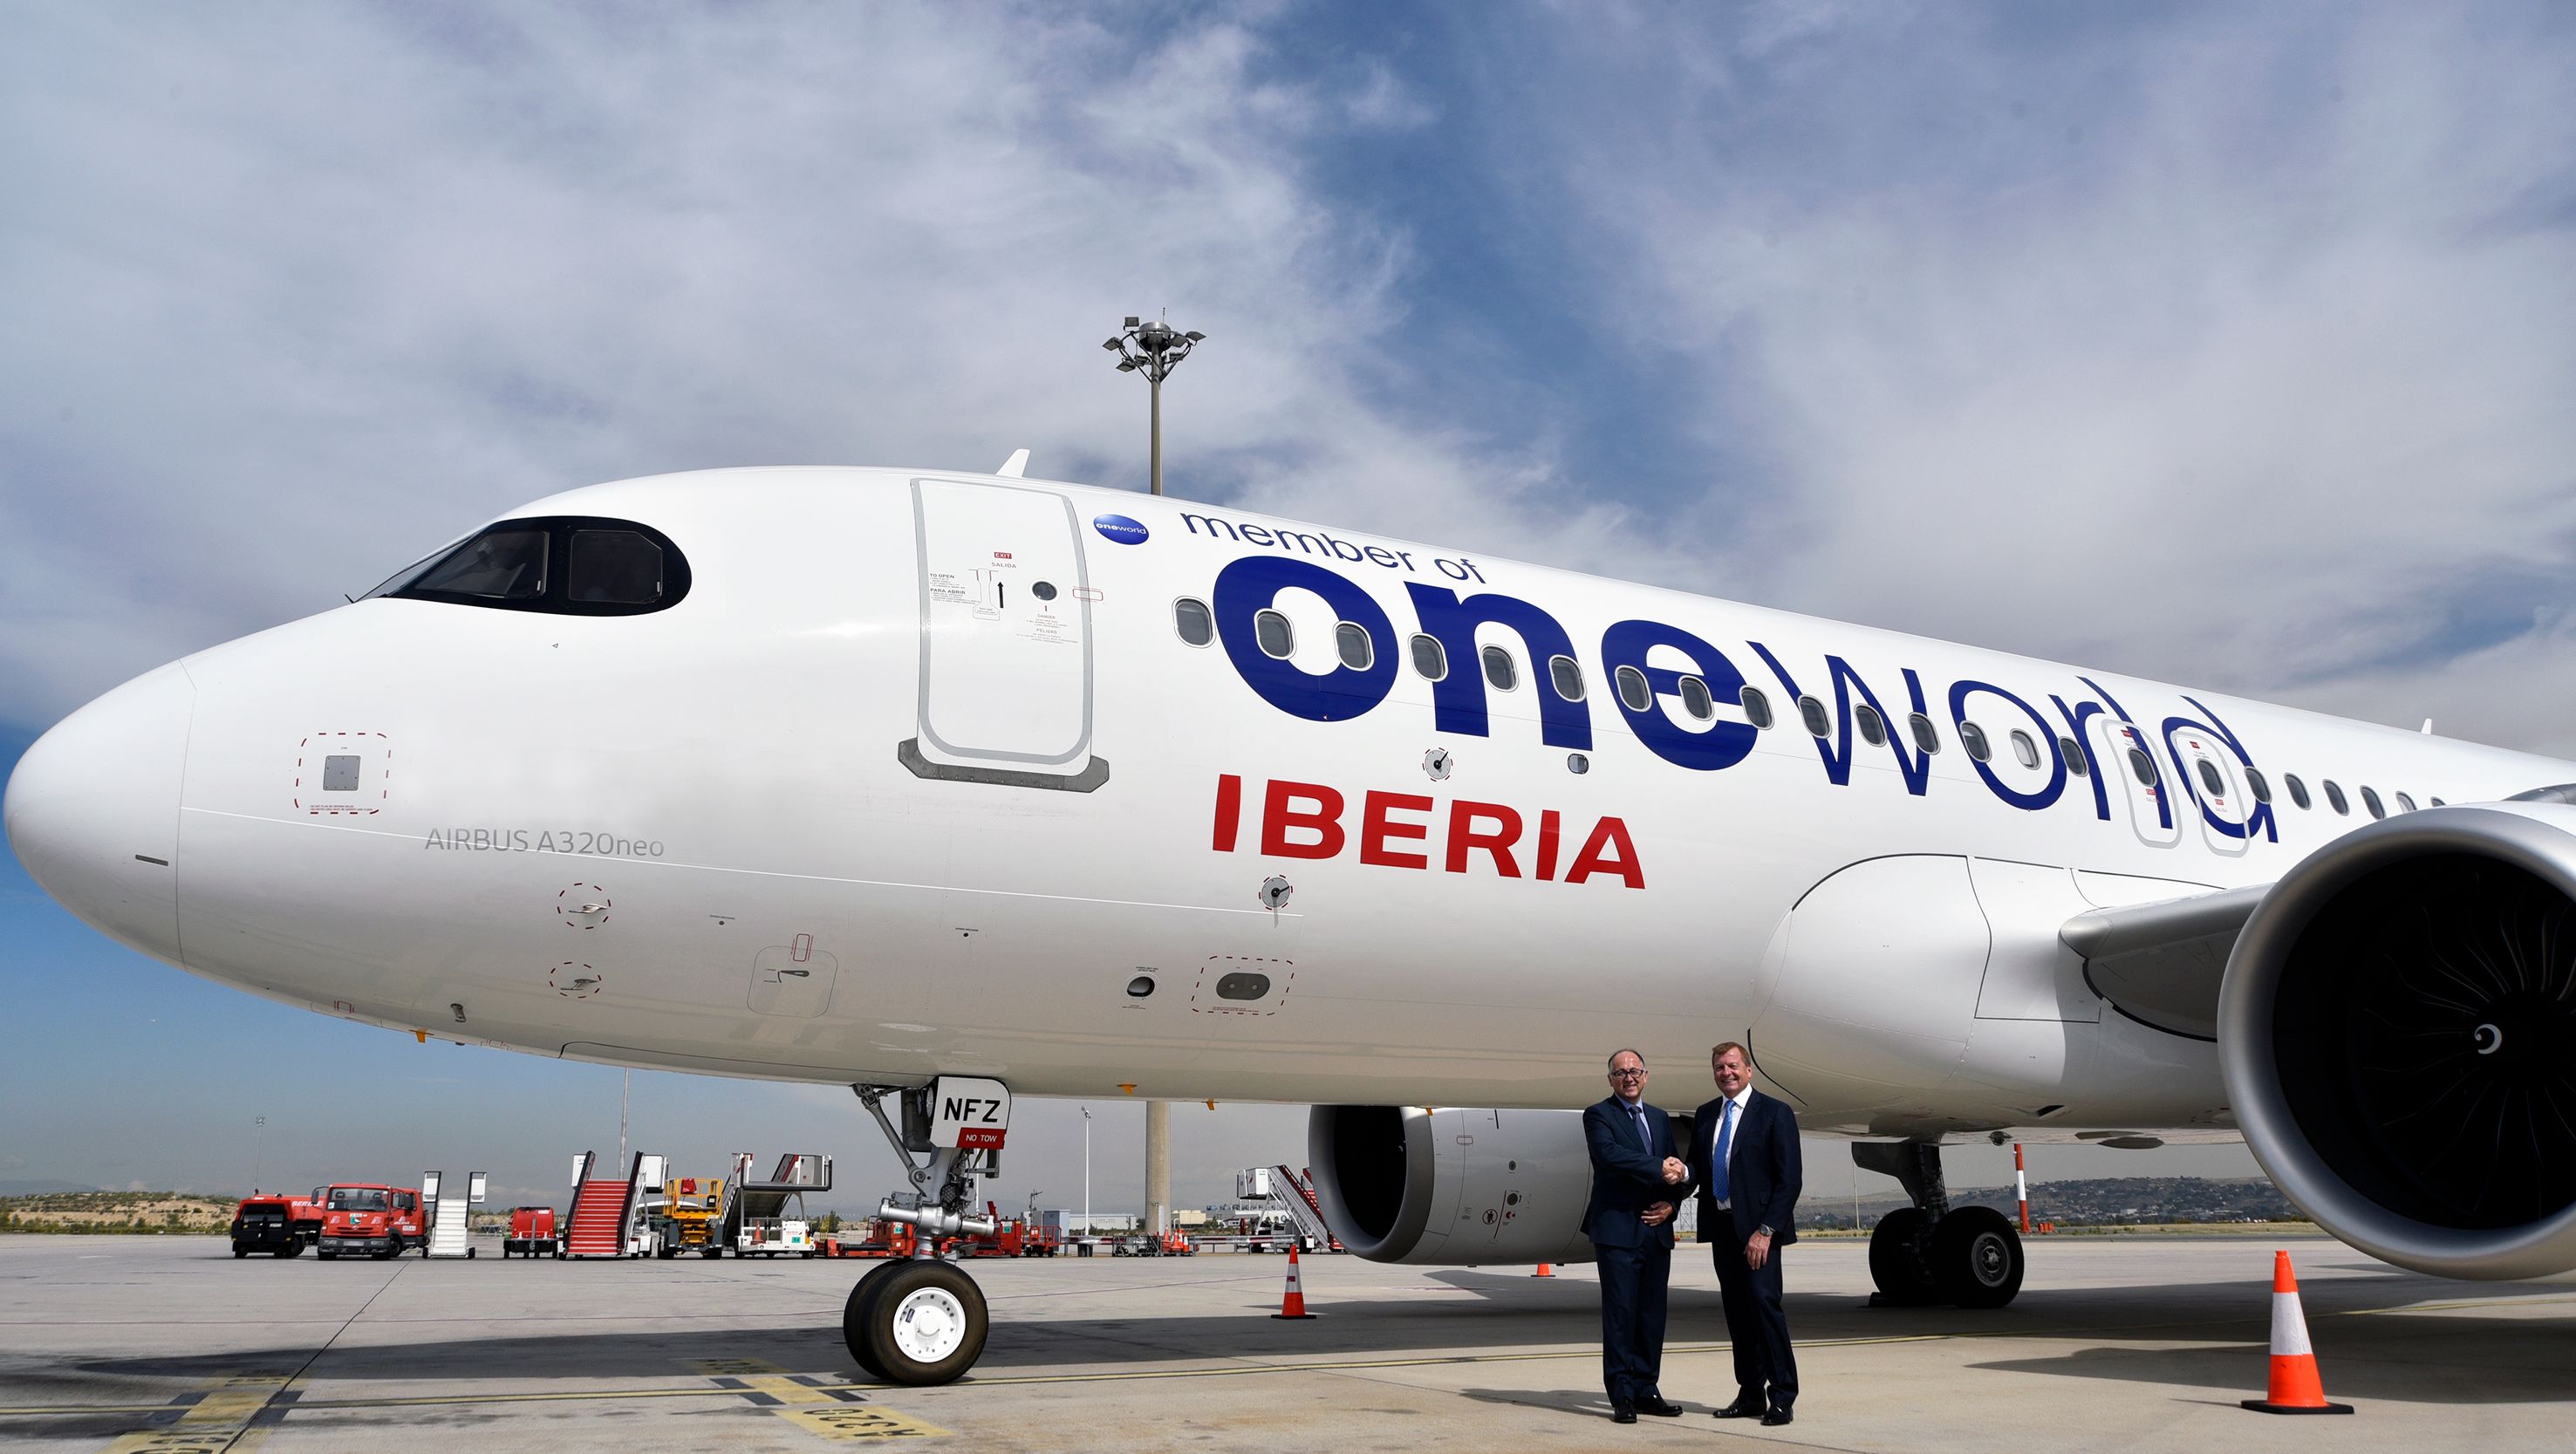 An Iberia aircraft with Oneworld livery